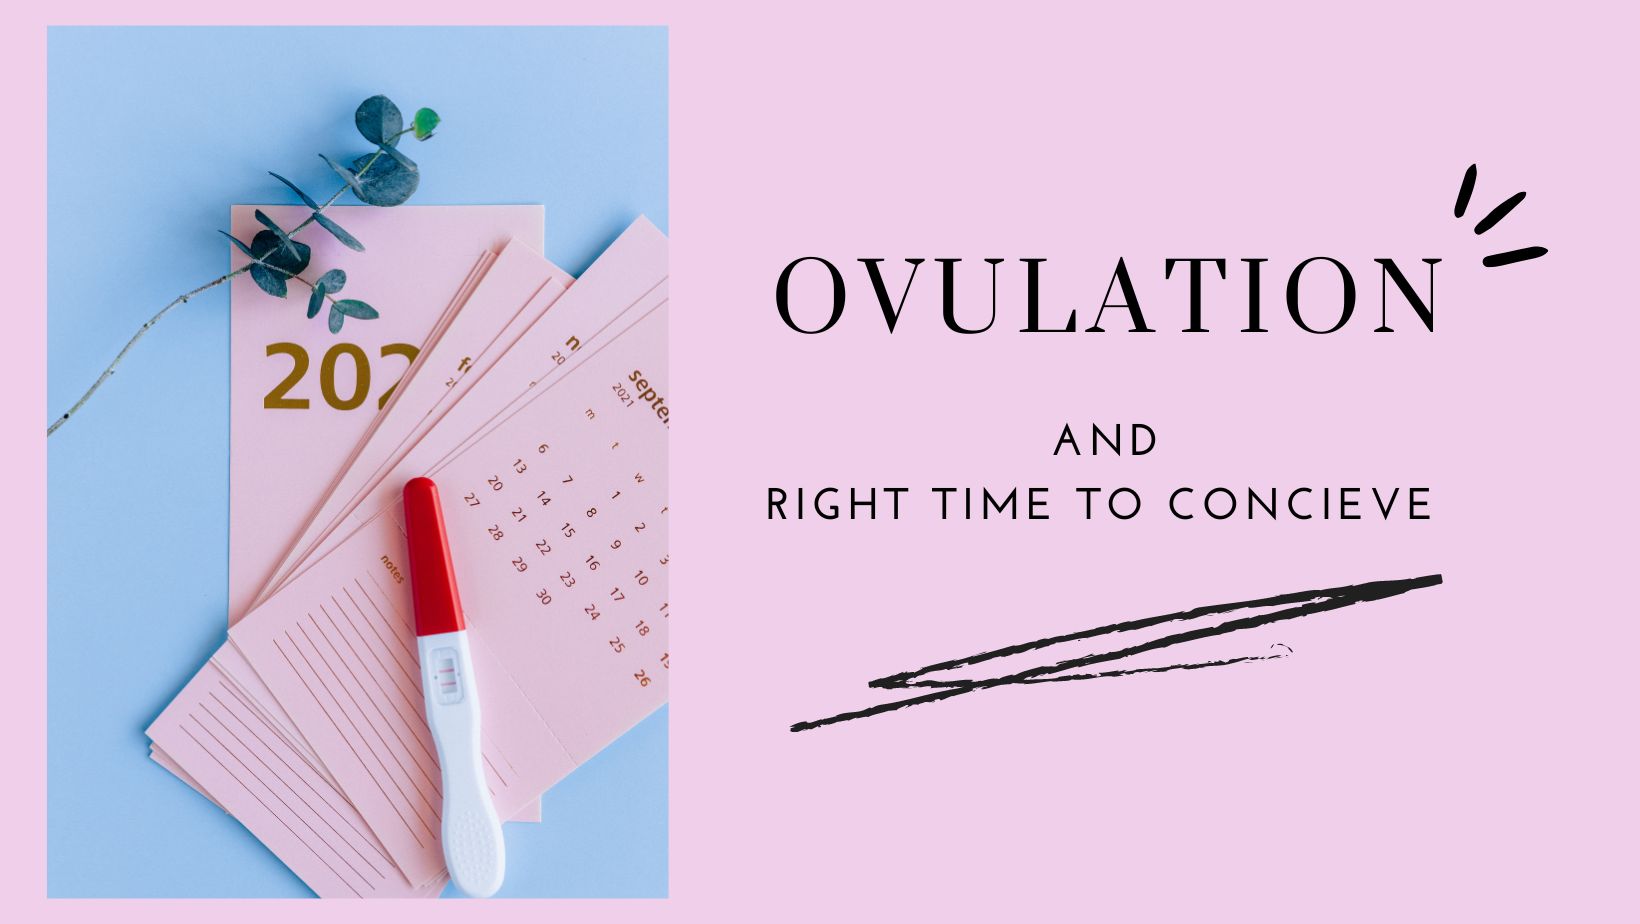 Ovulation and the right time to conceive